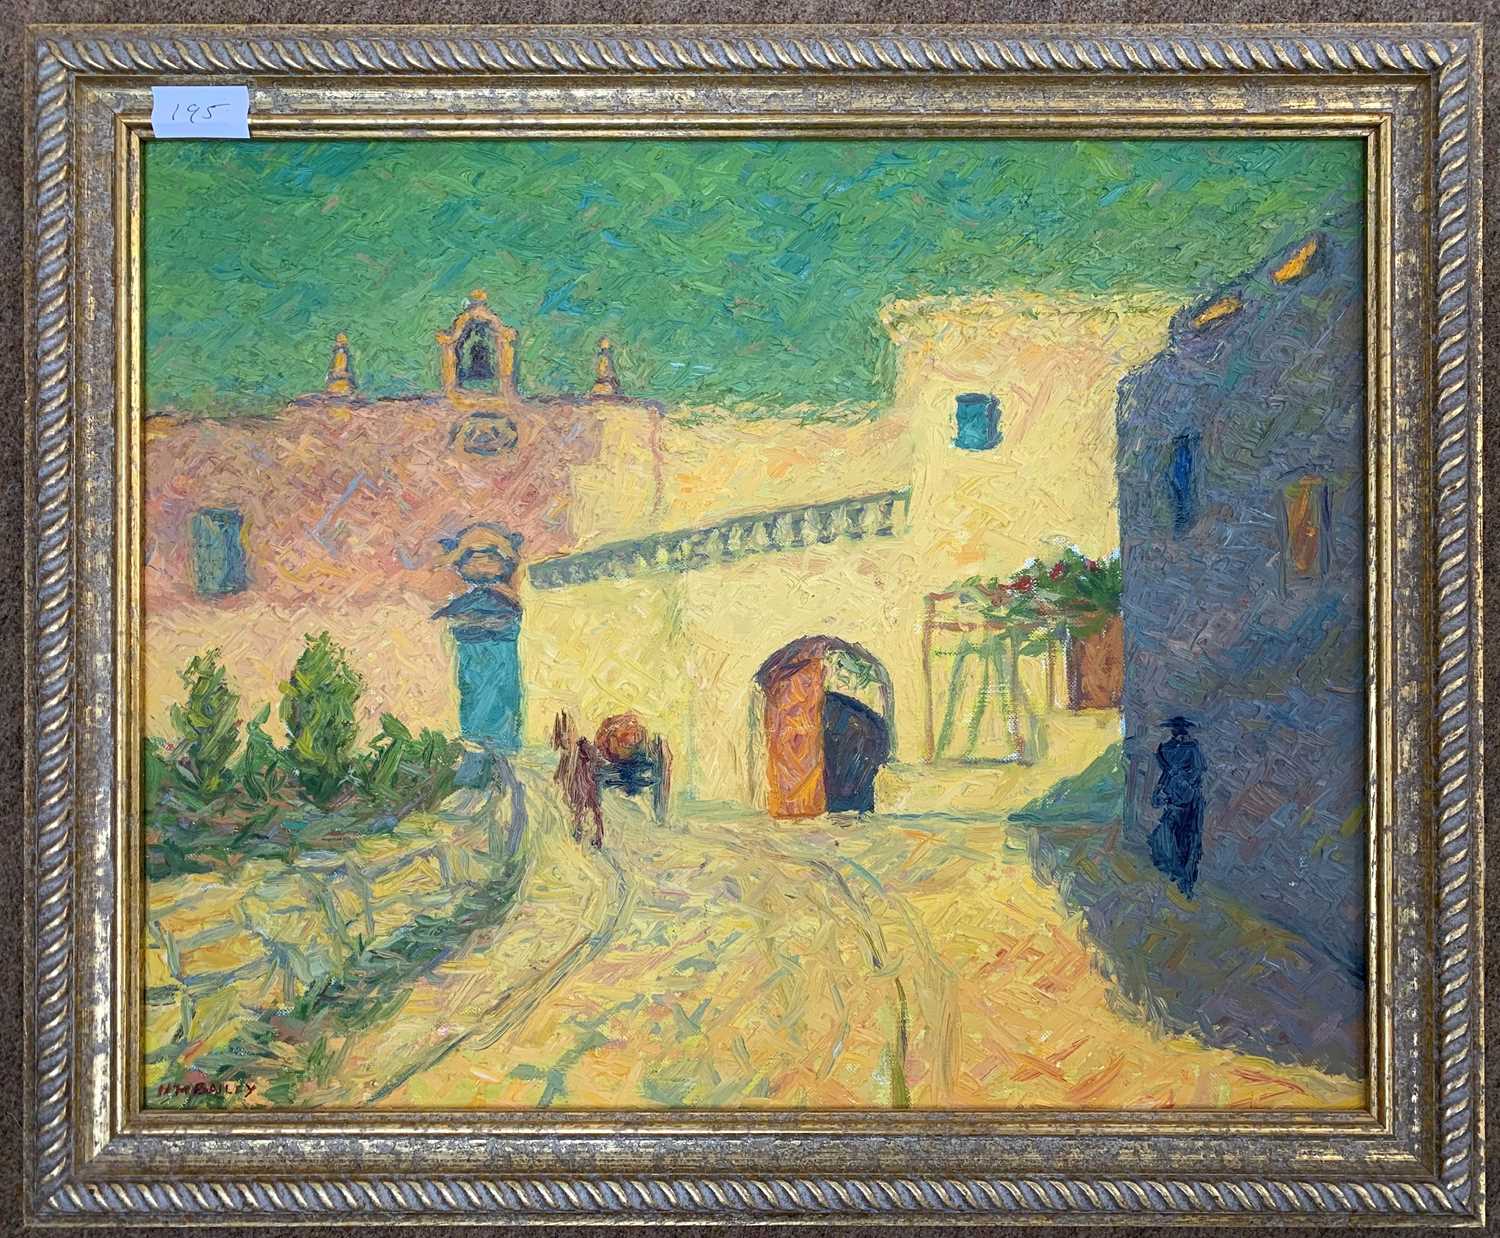 H.M.Bailey (20th century), 'Malta-The Road To Wardija', oil on canvas, signed, 40x49cm, framed